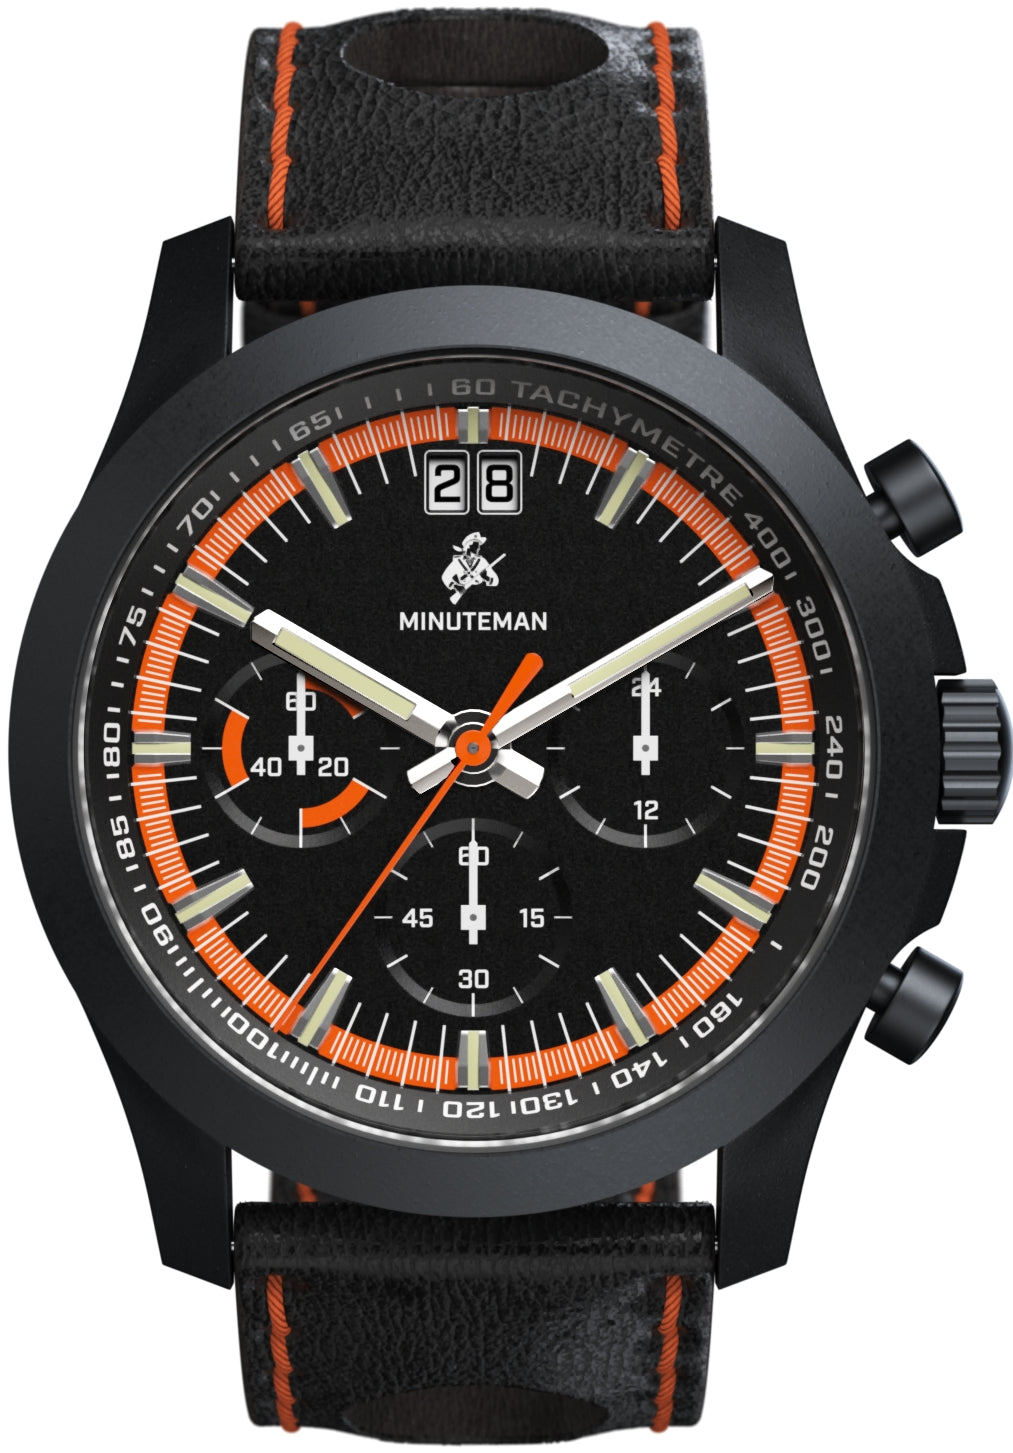 Minuteman Watches Launches New Salvo in Campaign for Vets - The CGA Company